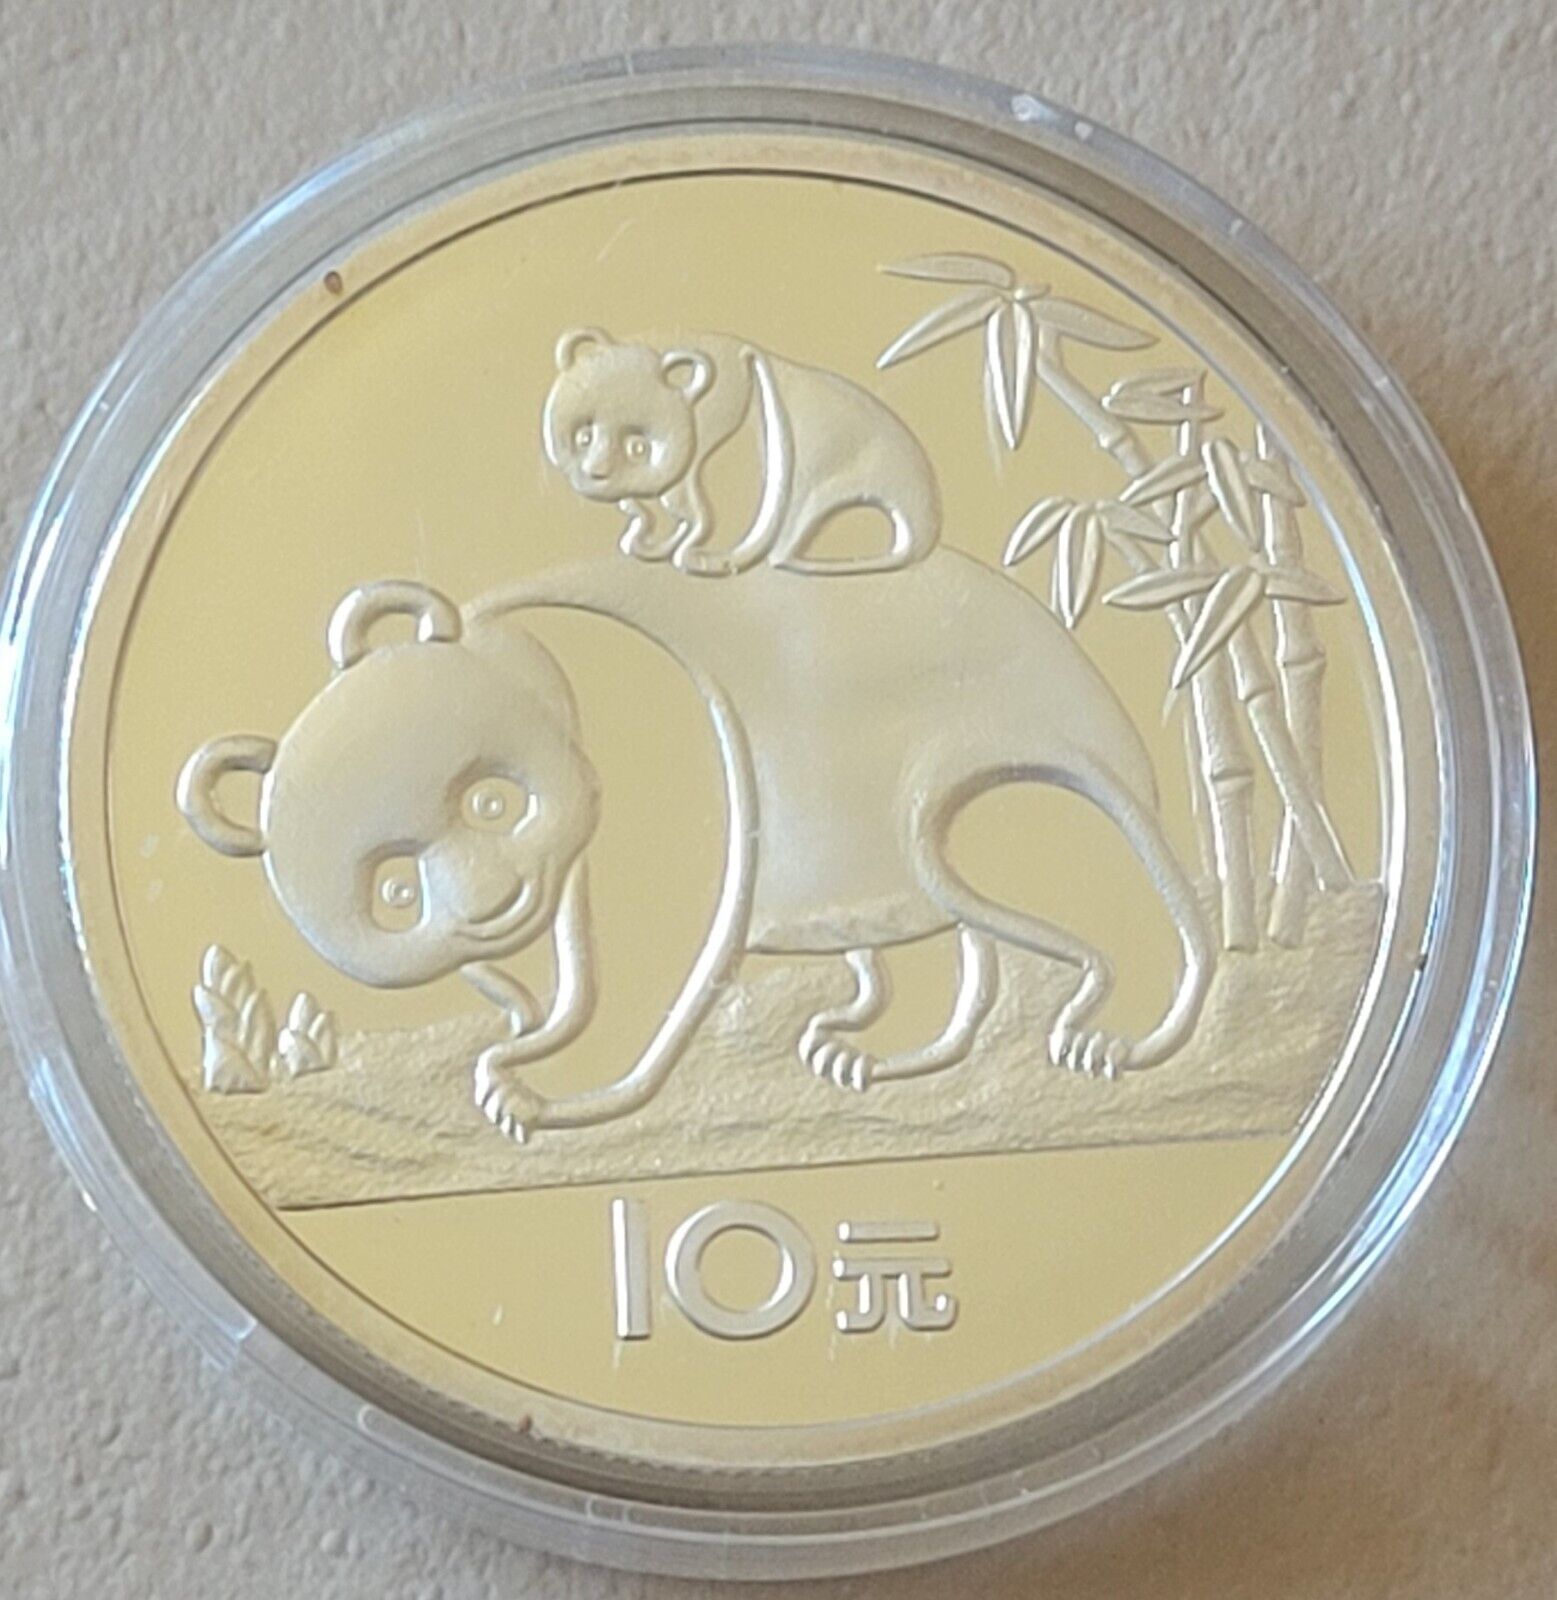 Primary image for CHINA 10 YUAN PANDA SILVER COIN 1985 PROOF SEE DESCRIPTION